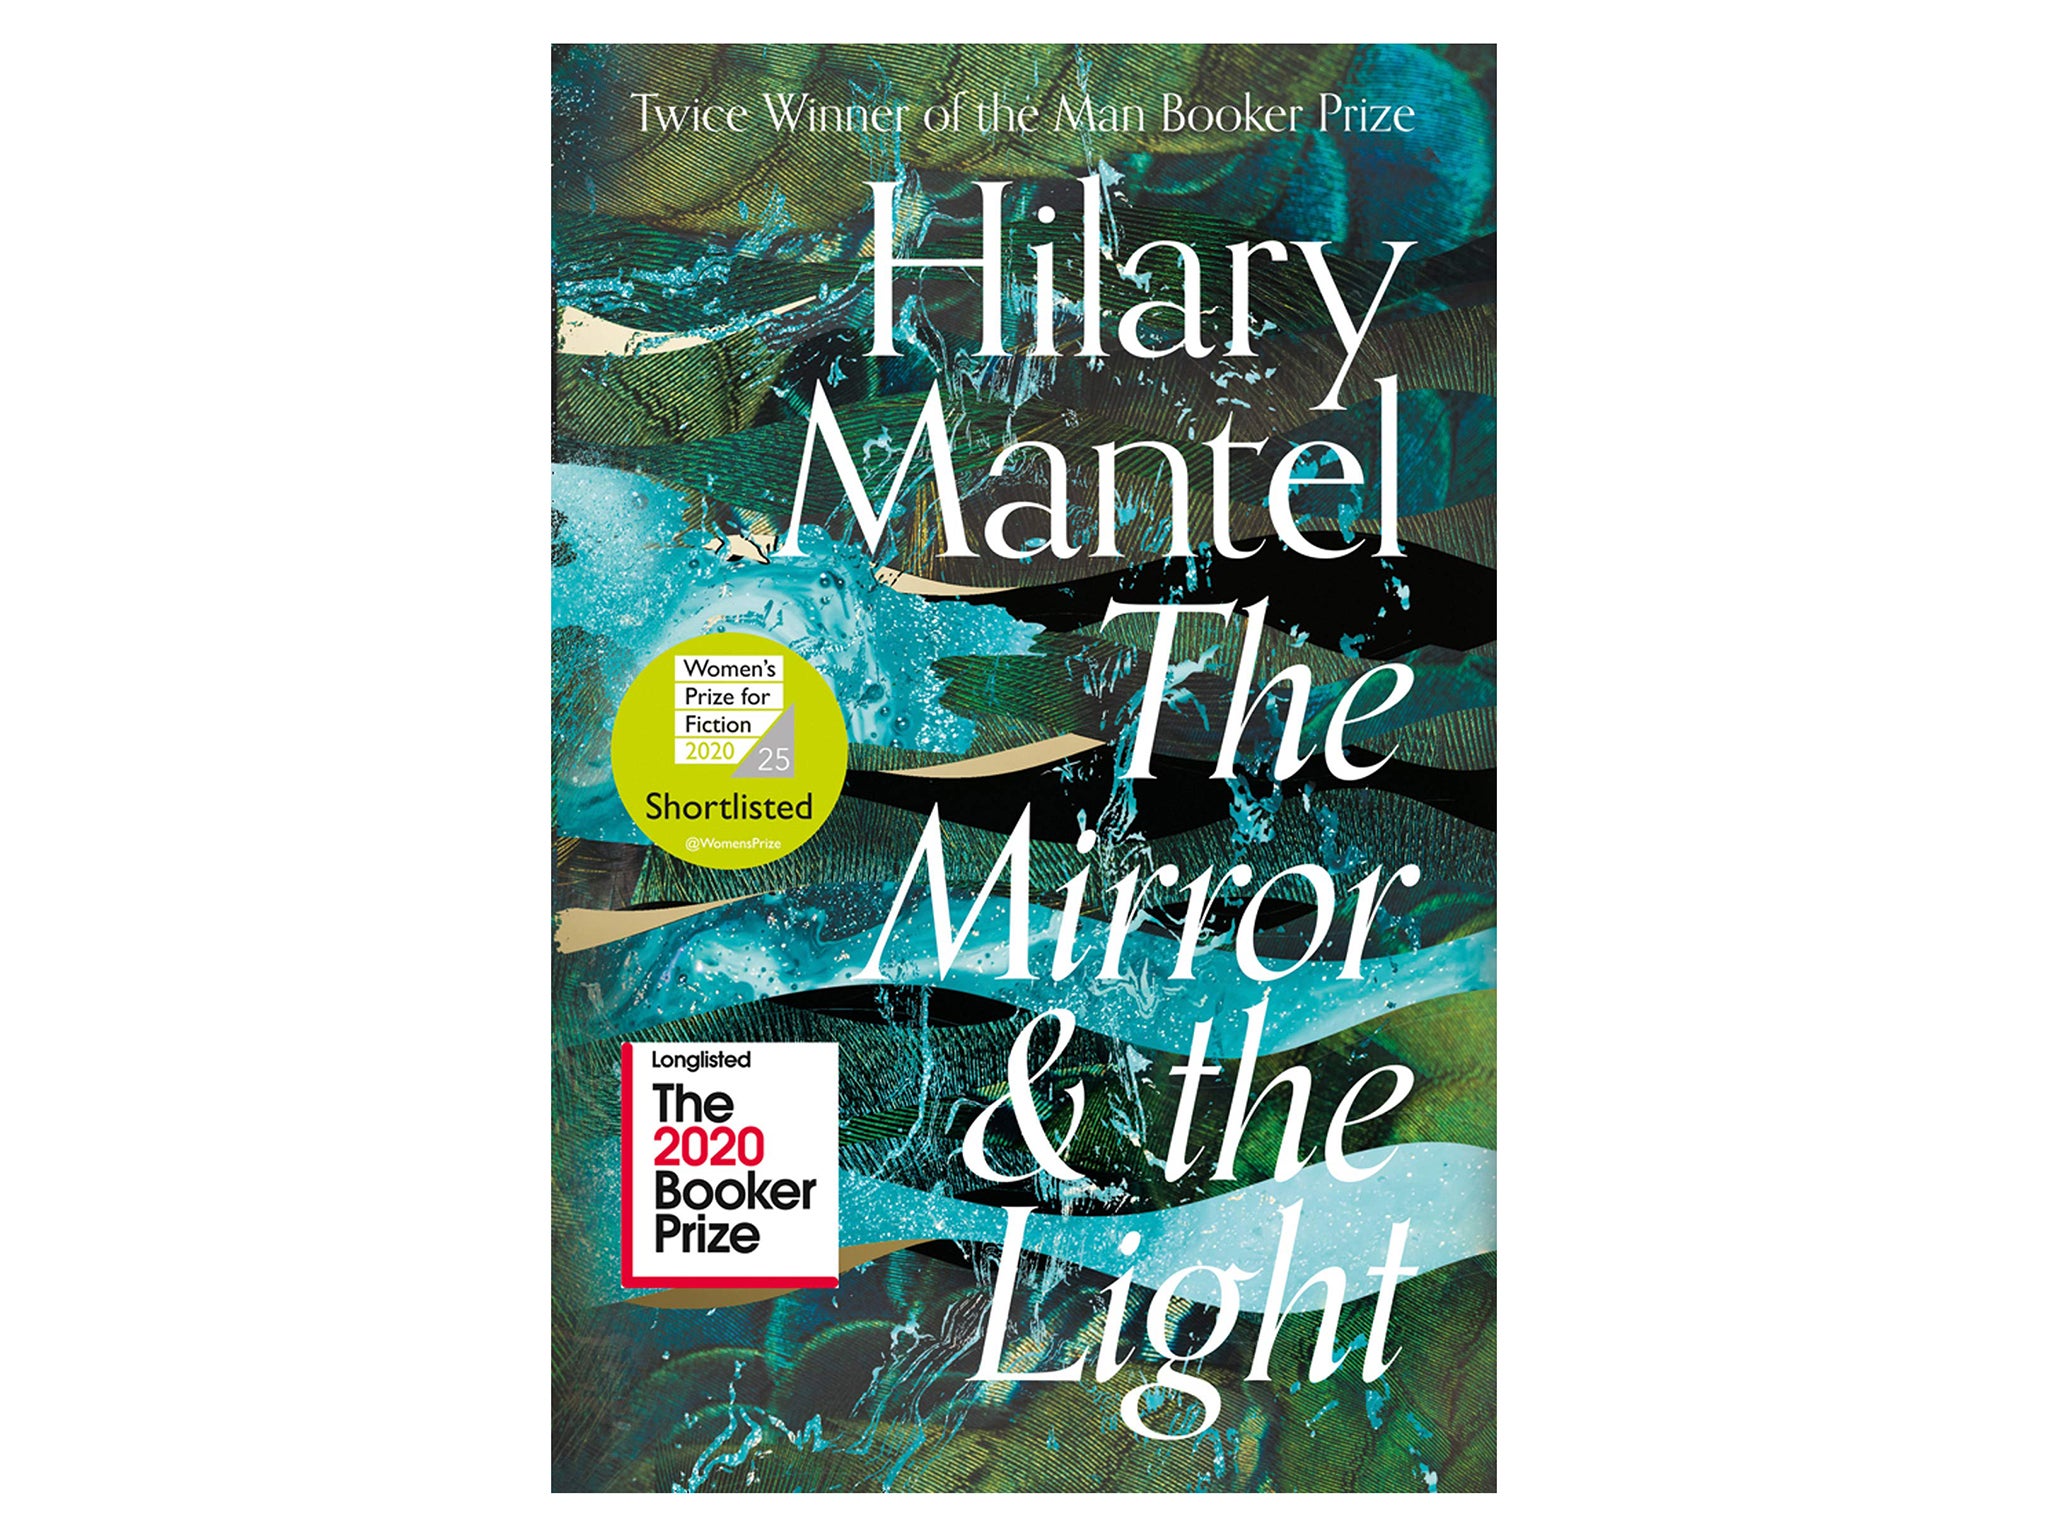 hilary-mantel-the-mirror-and-the-night-duchess-of-cornwall-reading-room-indybest.jpg